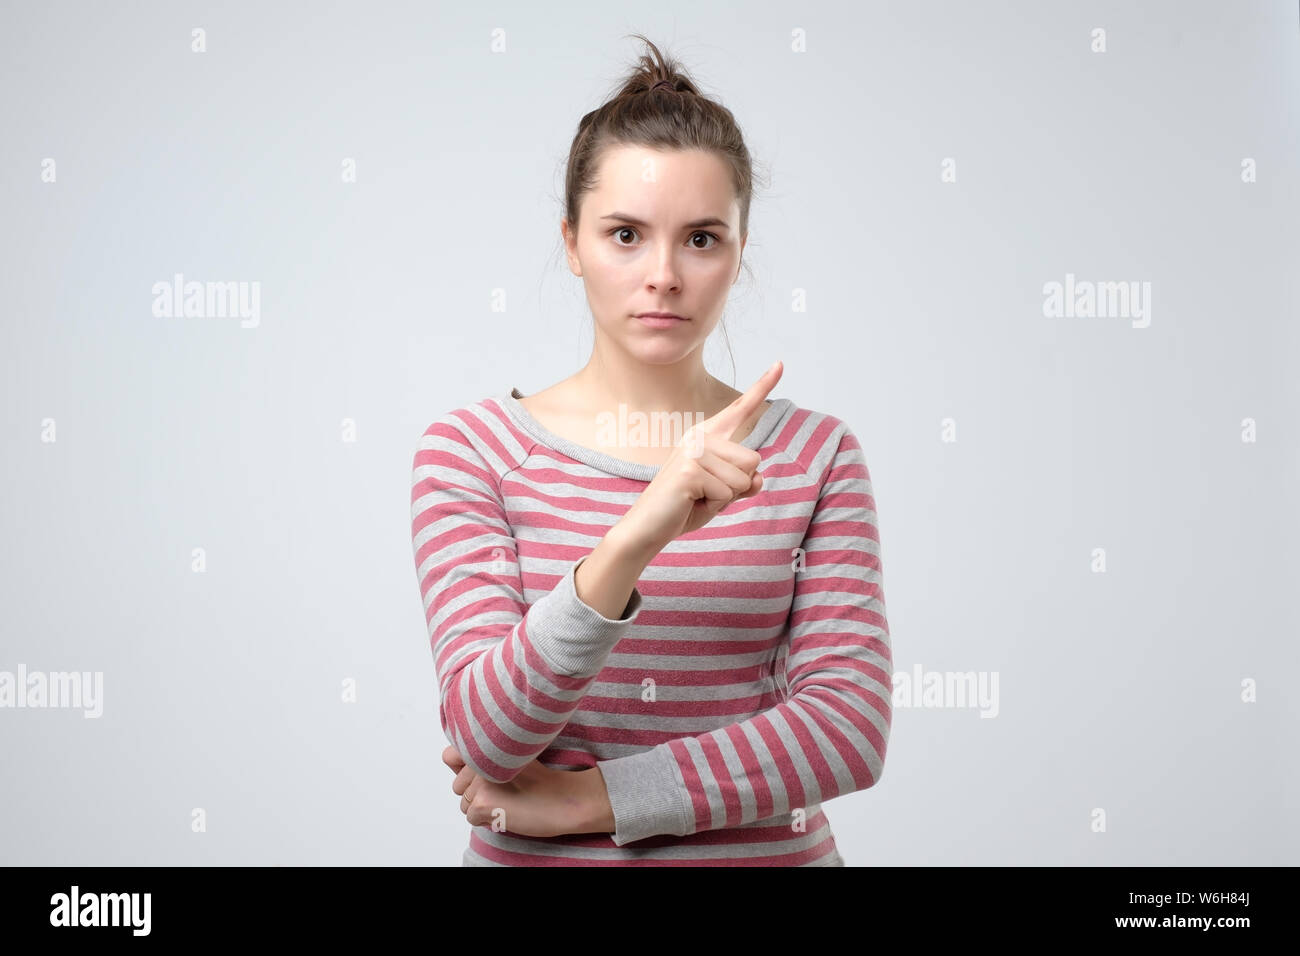 Woman Saying No High Resolution Stock Photography and Images - Alamy